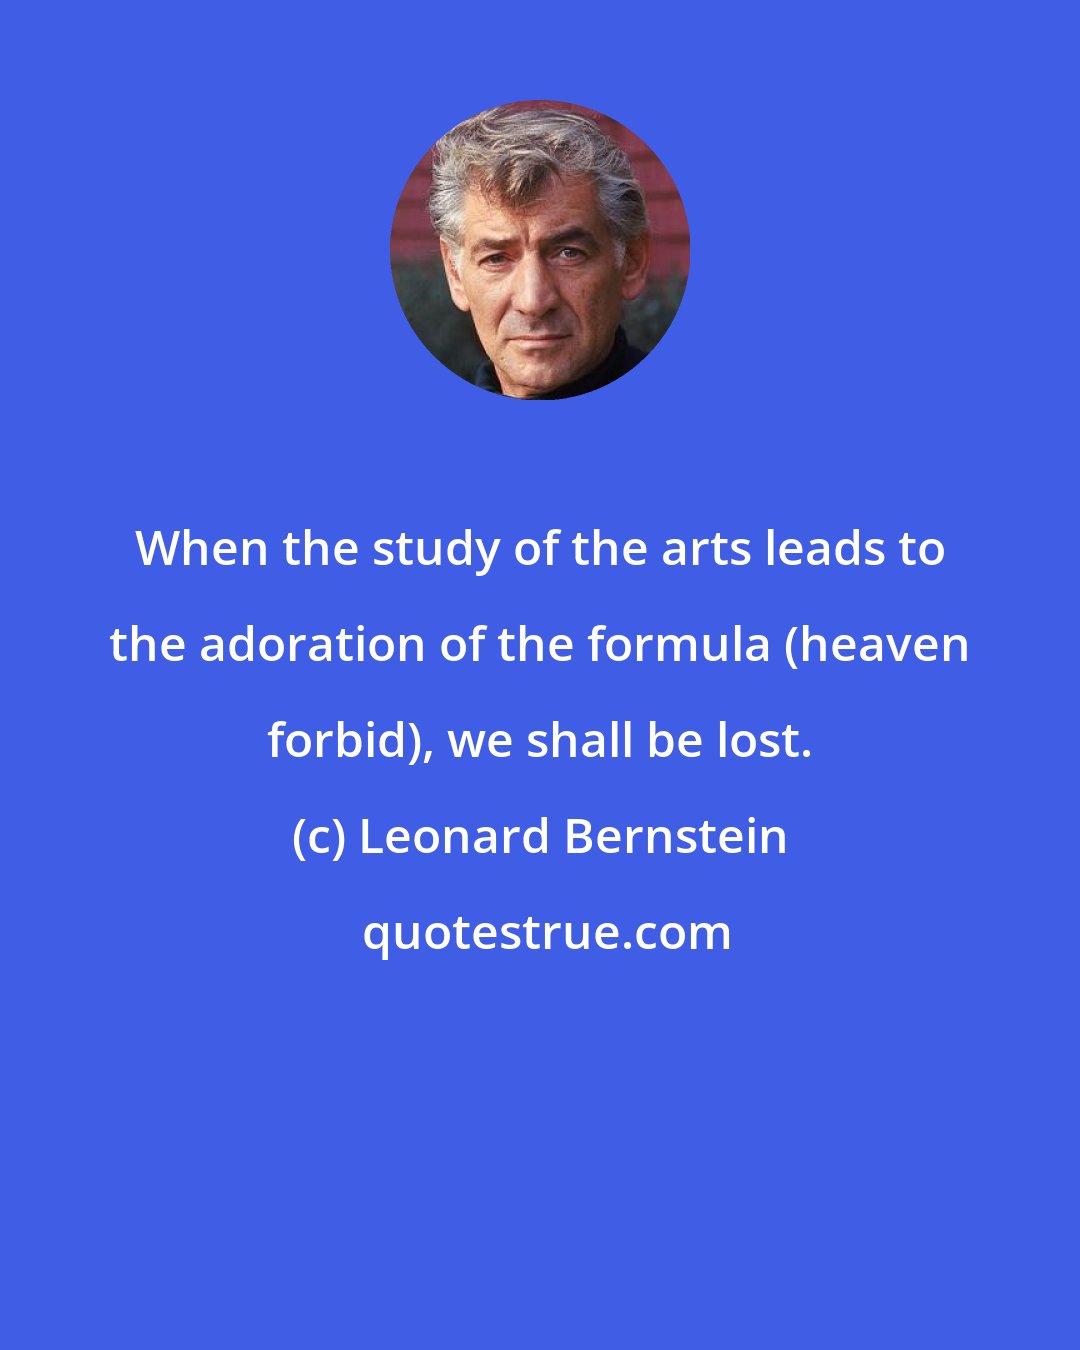 Leonard Bernstein: When the study of the arts leads to the adoration of the formula (heaven forbid), we shall be lost.